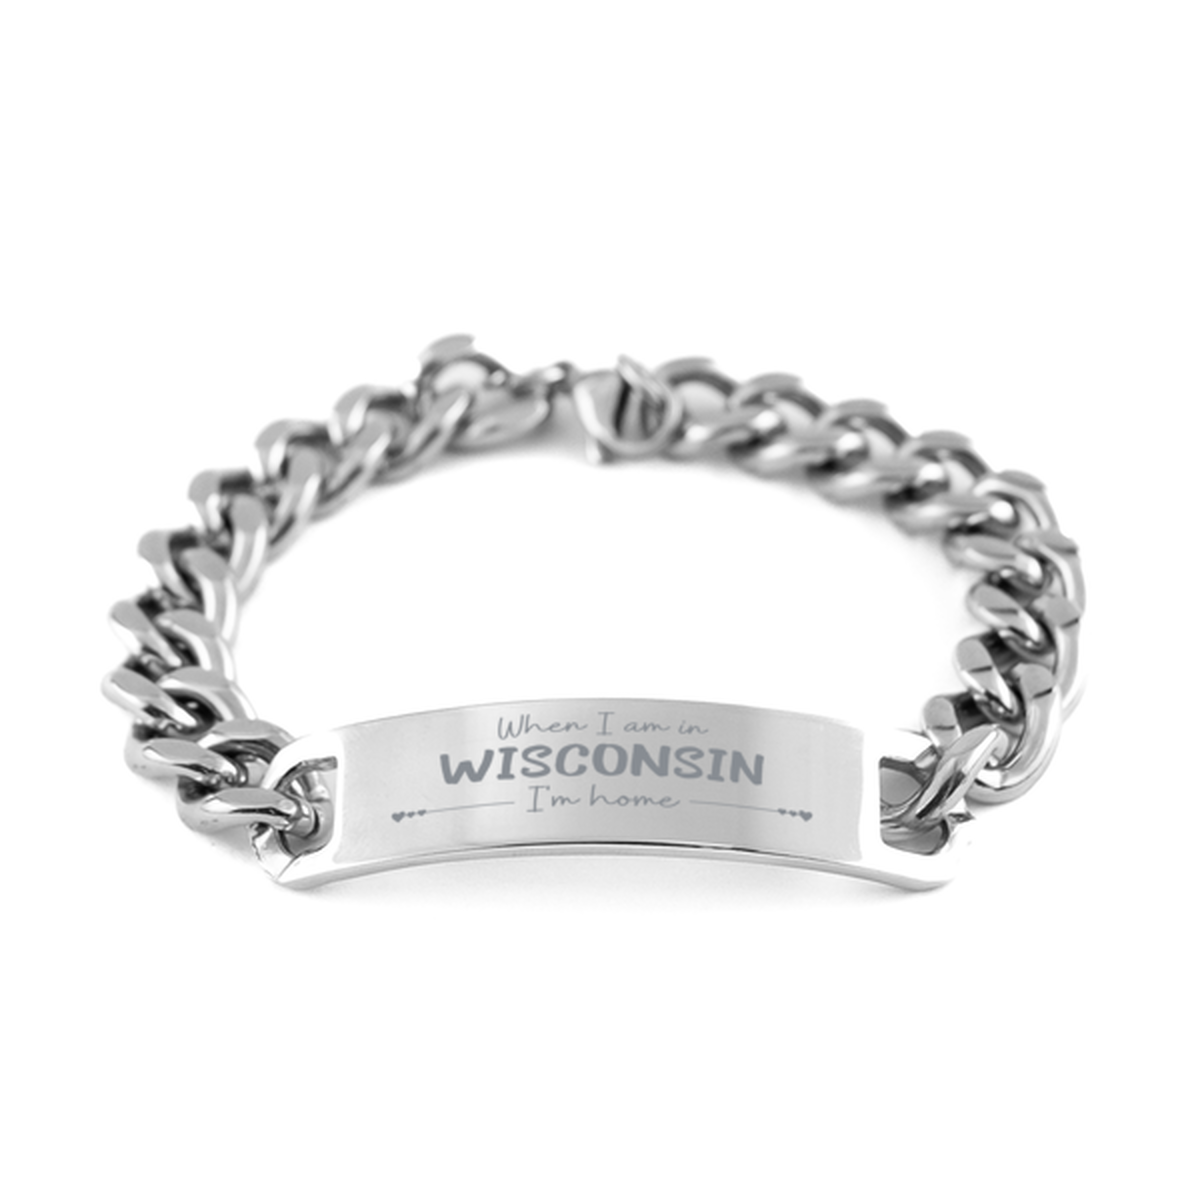 When I am in Wisconsin I'm home Cuban Chain Stainless Steel Bracelet, Cheap Gifts For Wisconsin, State Wisconsin Birthday Gifts for Friends Coworker